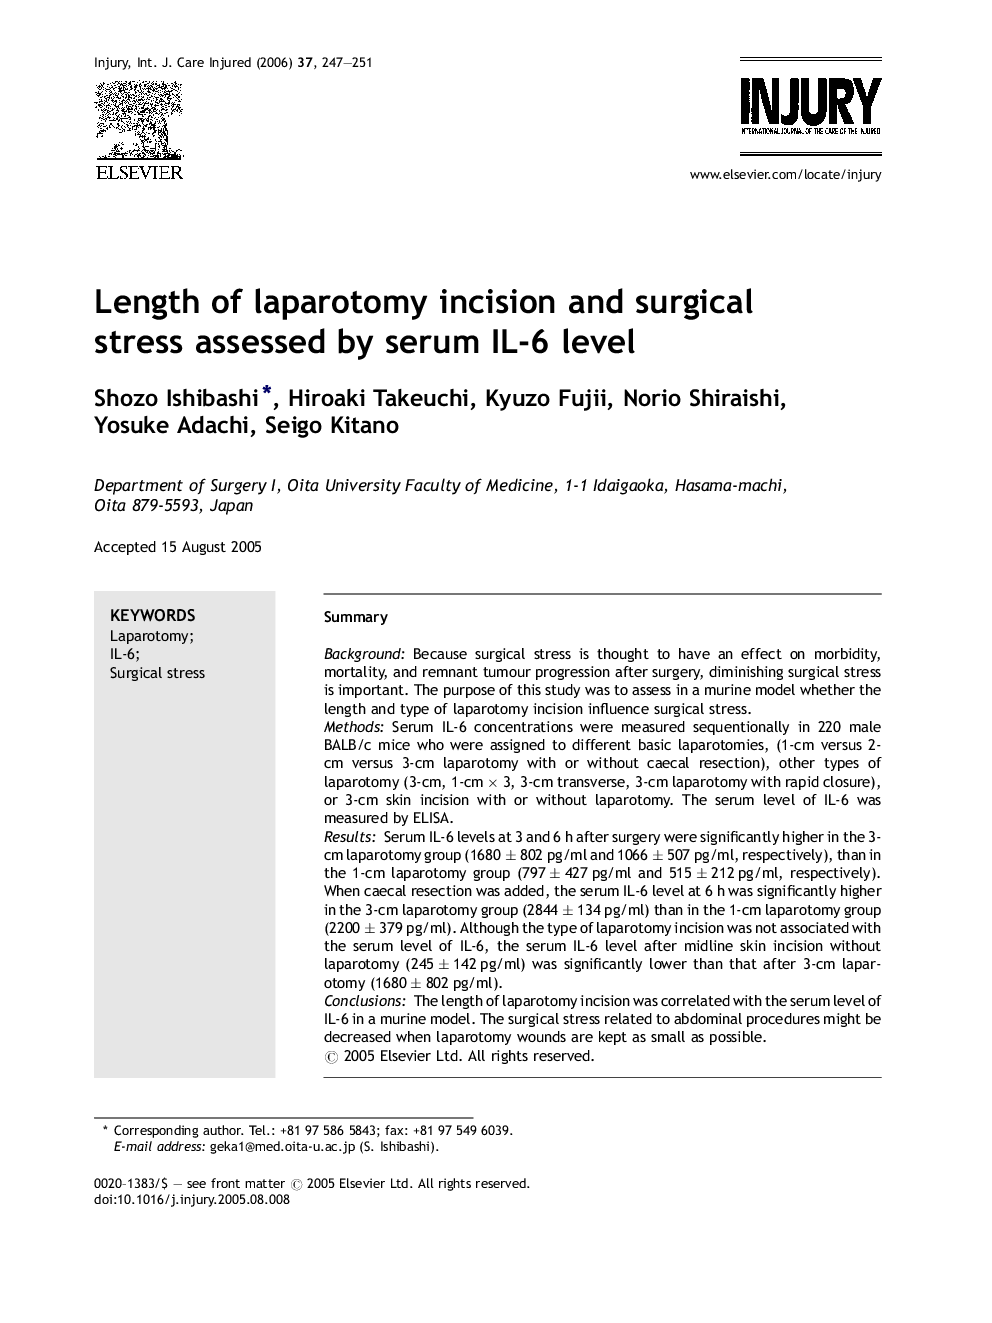 Length of laparotomy incision and surgical stress assessed by serum IL-6 level